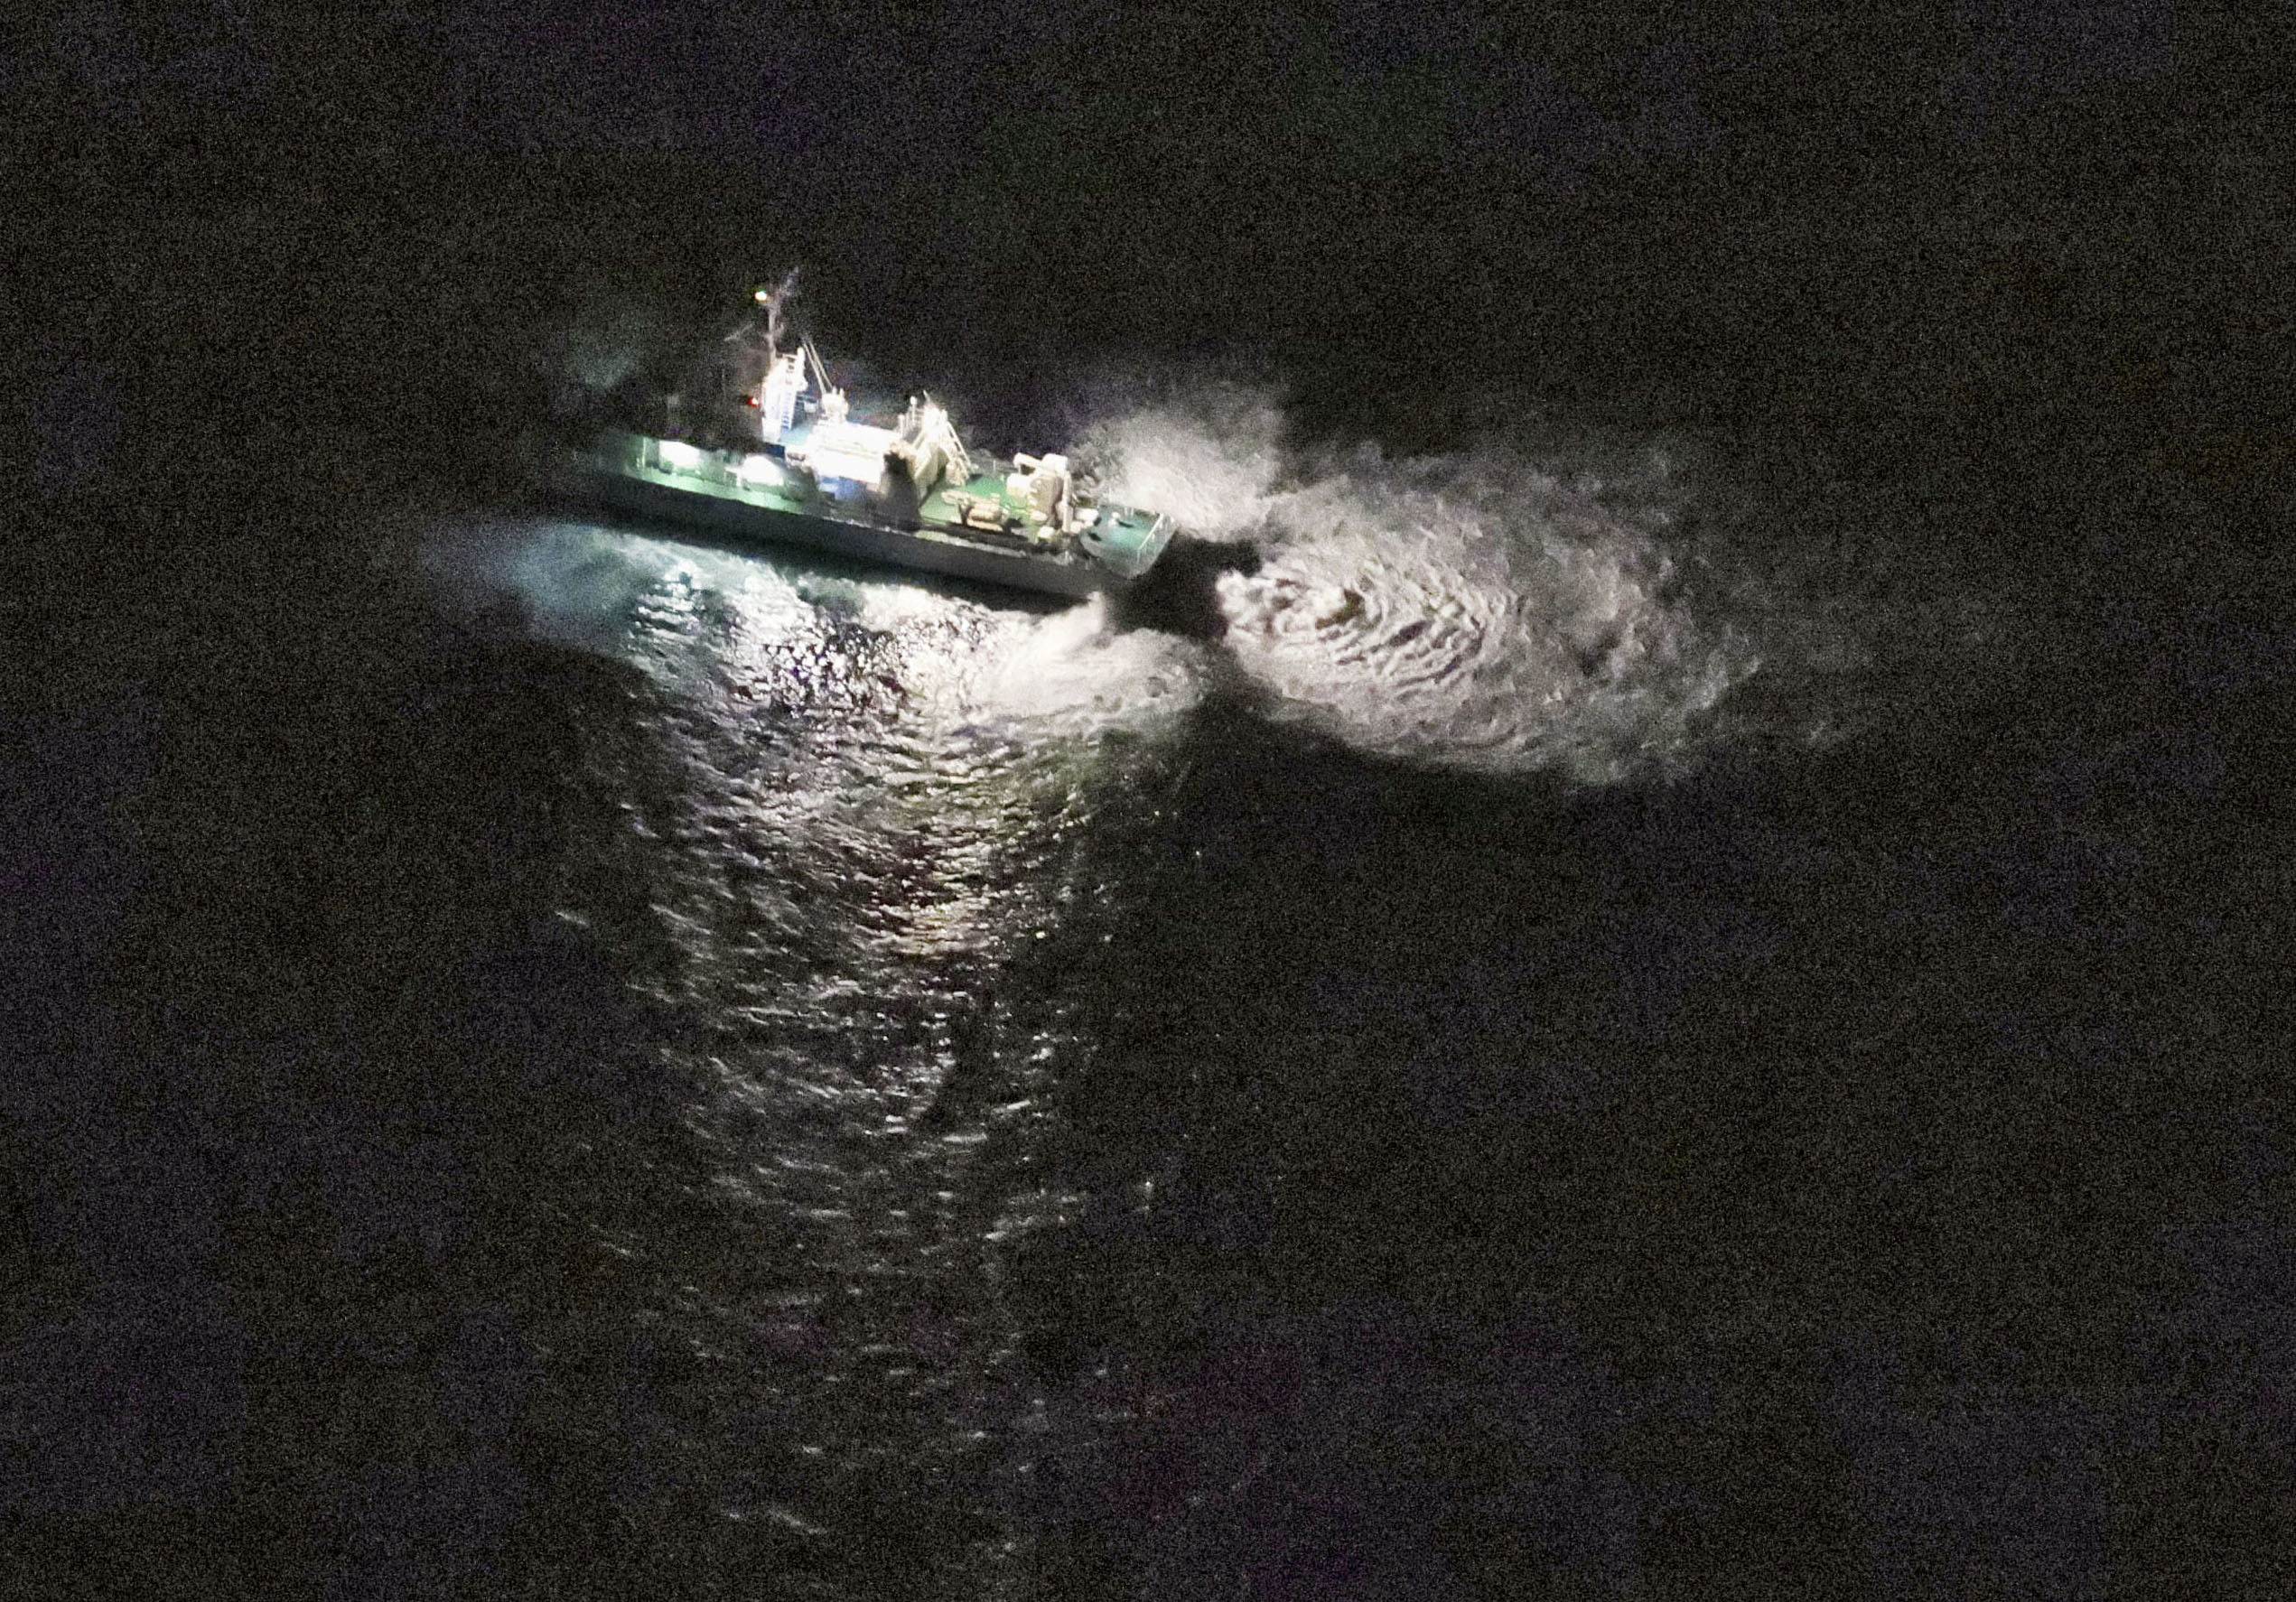 A Japan Coast Guard vessel conducts search and rescue operation at the site where a U.S. military aircraft MV-22 Osprey crashed into the sea off Yakushima Island, Japan